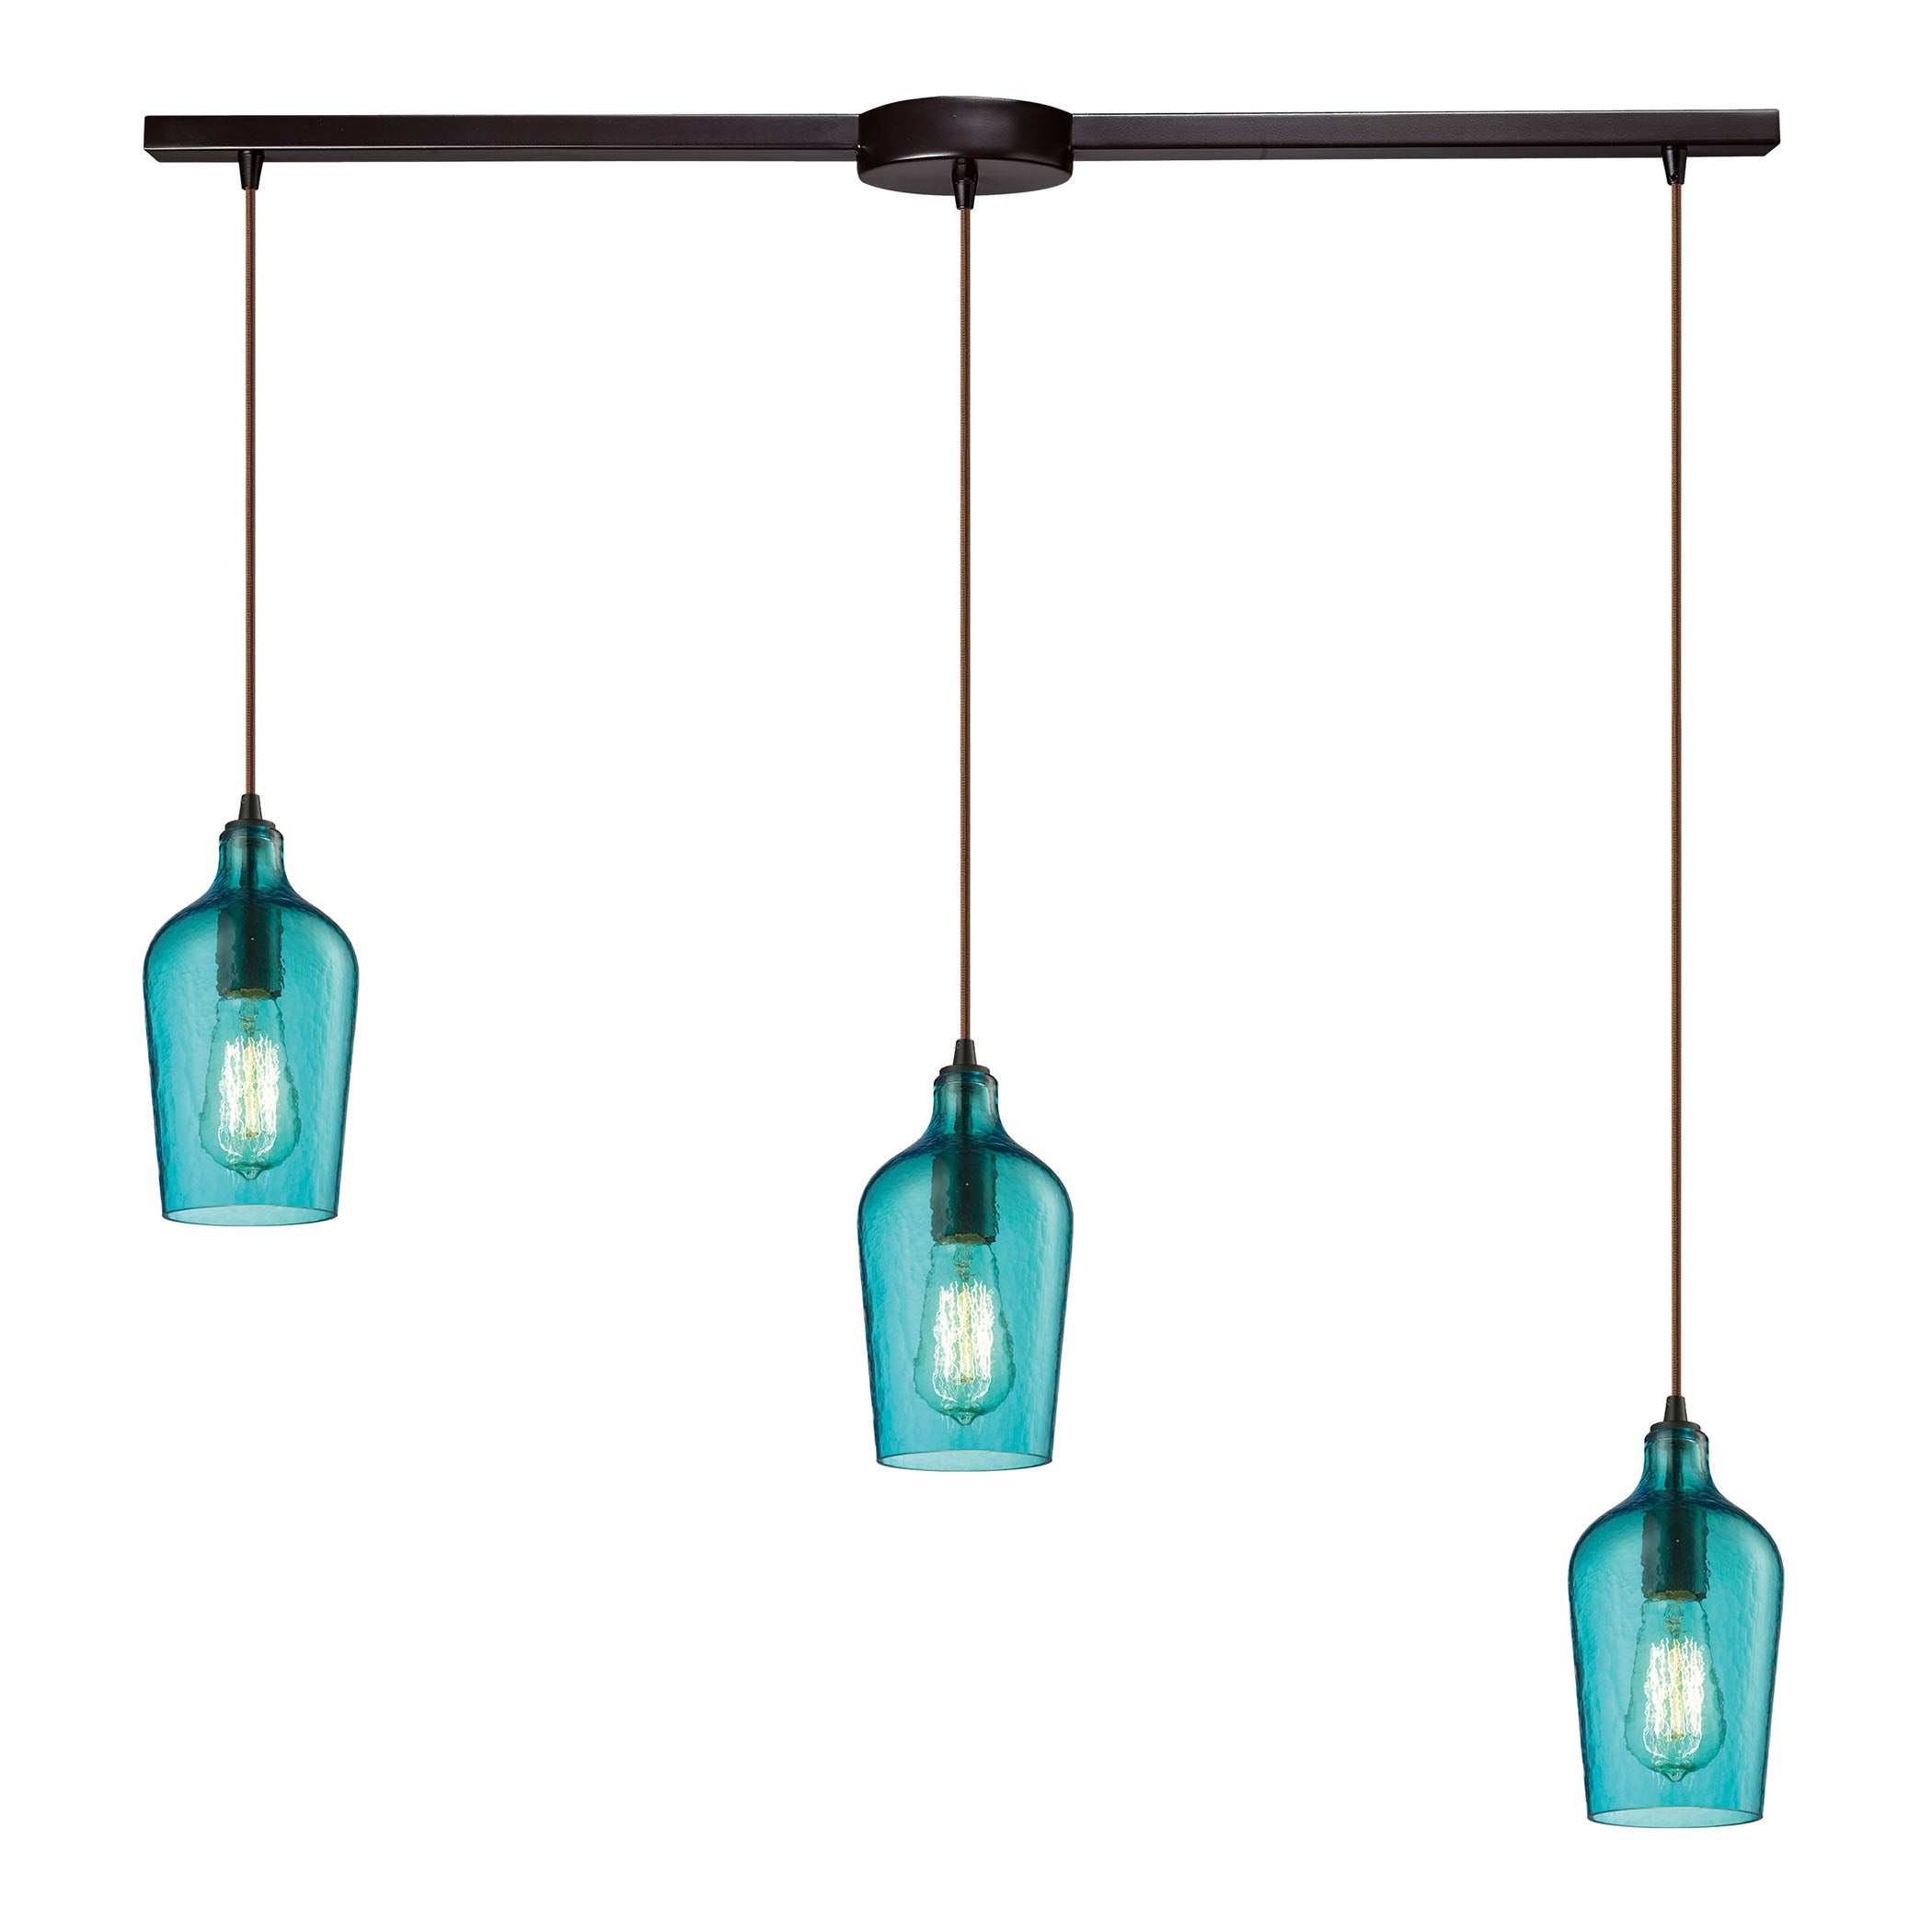 ELK Lighting 10331/3L-HAQ Hammered Glass 3-Light Linear Pendant Fixture in Oiled Bronze with Hammered Aqua Glass